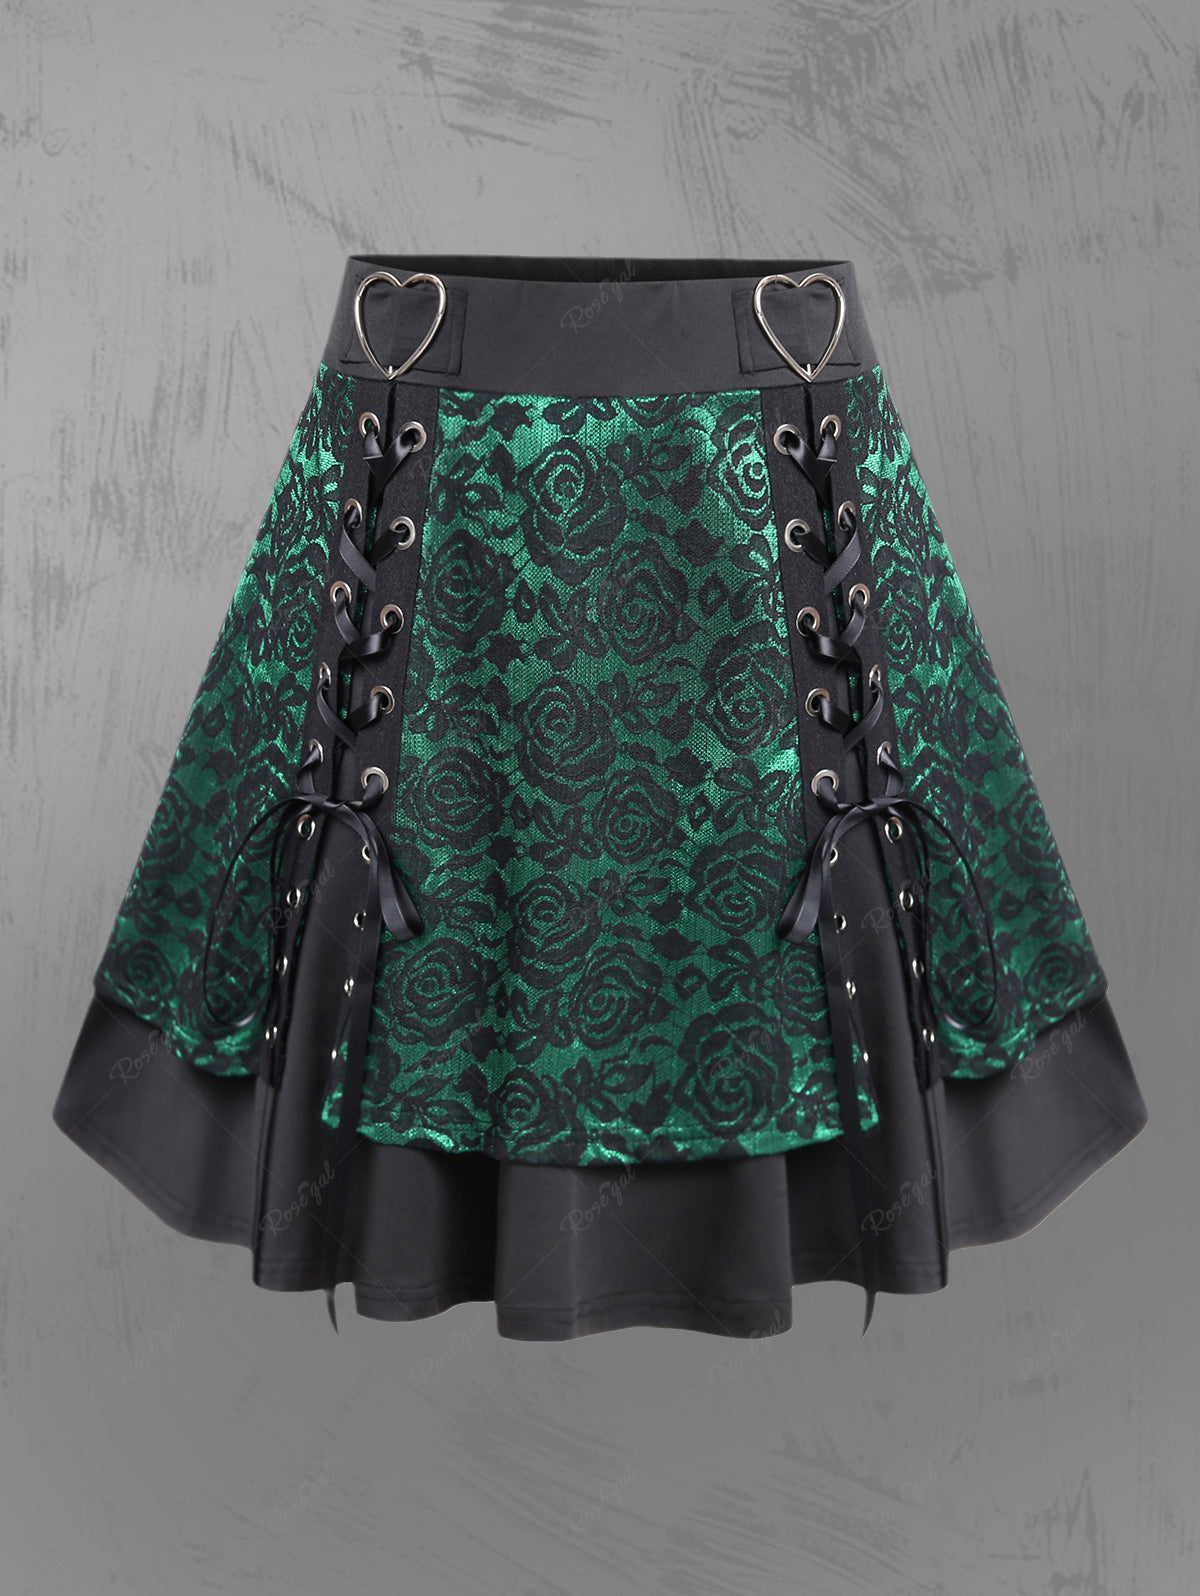 💗Lauren Loves💗Gothic Heart Buckles Lace Up Floral Lace Layered Skirt